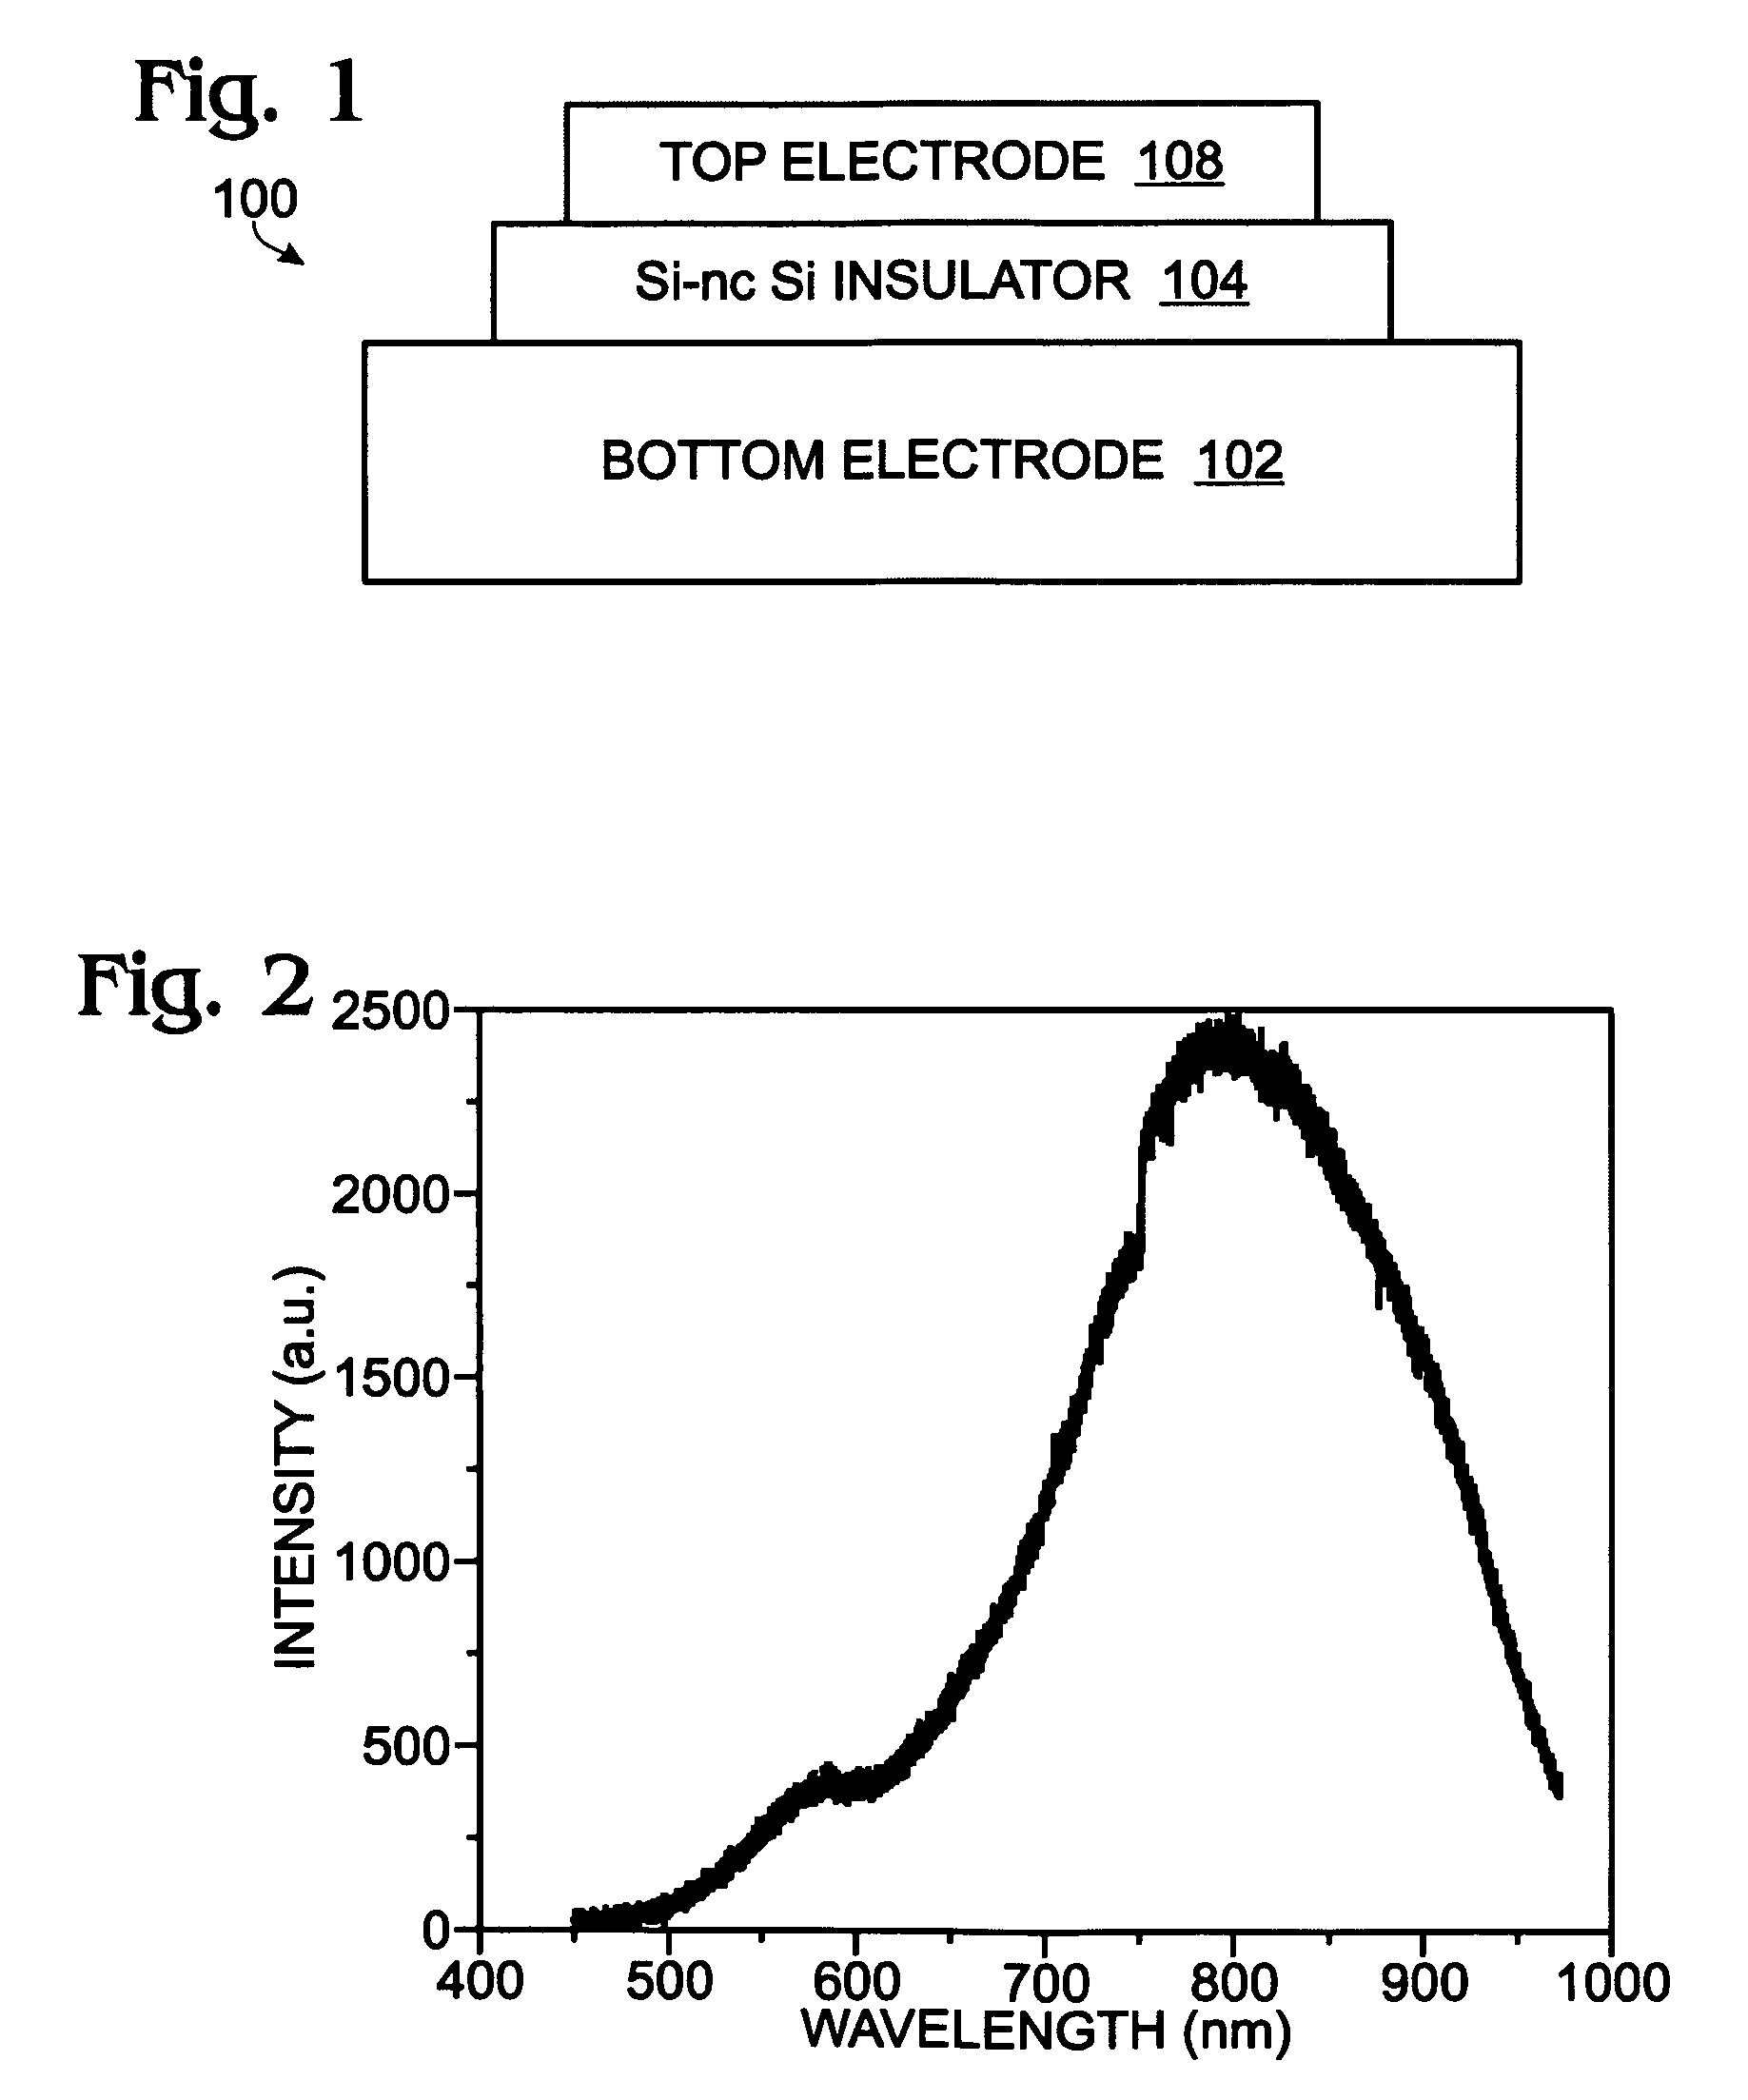 Method of forming silicon nanocrystal embedded silicon oxide electroluminescence device with a mid-bandgap transition layer